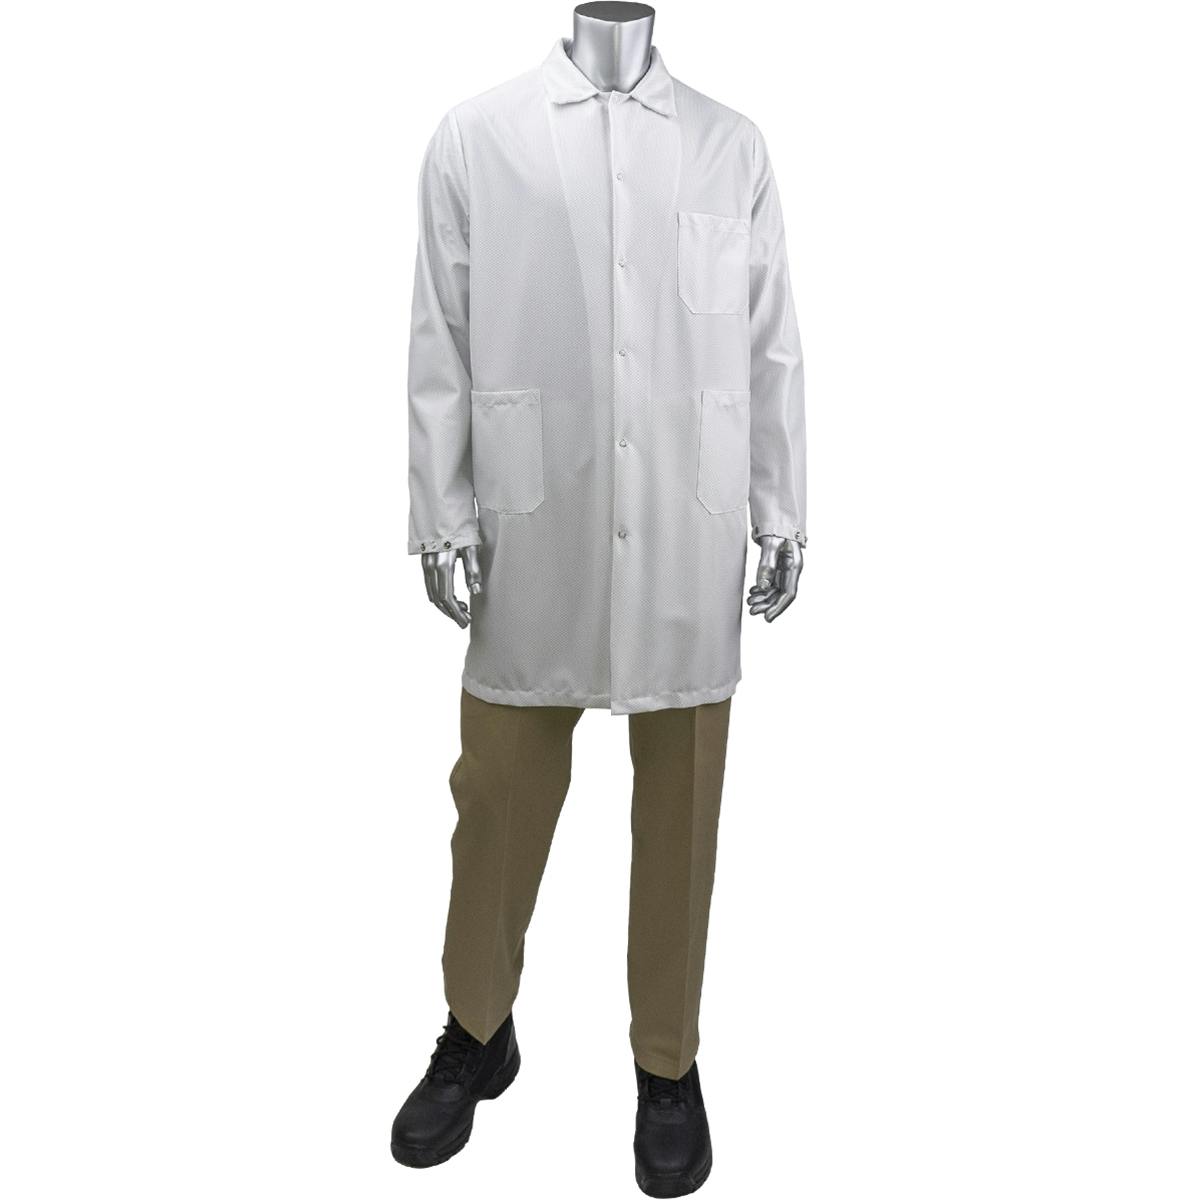 StatMaster Long ESD Labcoat, White (BR51-47WH)_0